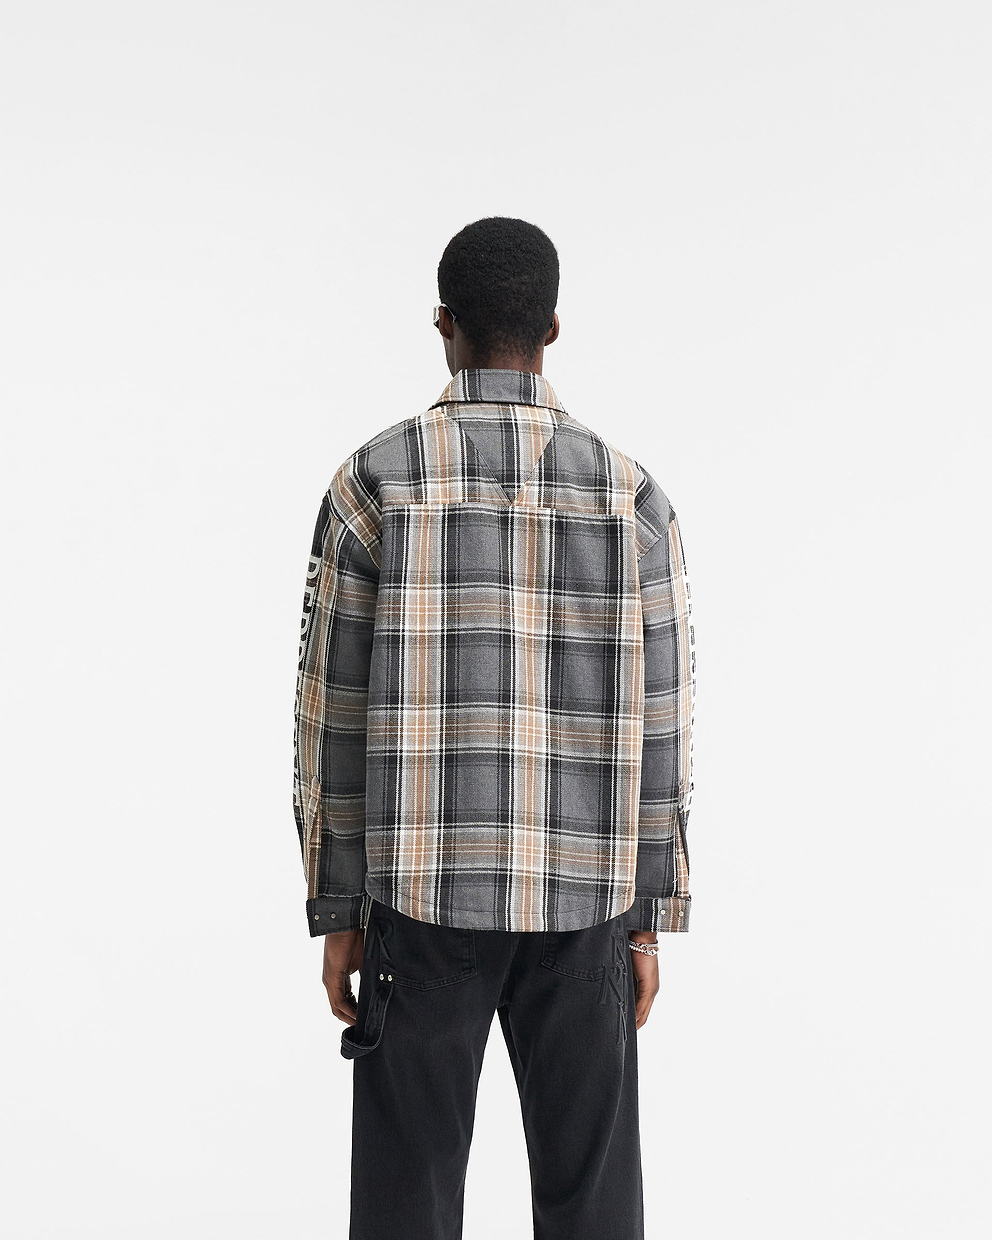 Plaid Flannel Shirt Red Button Down Flannel Shirt Jacket With Curved Hem  Plaid Shirt Jacket With Front Pocket -  Norway